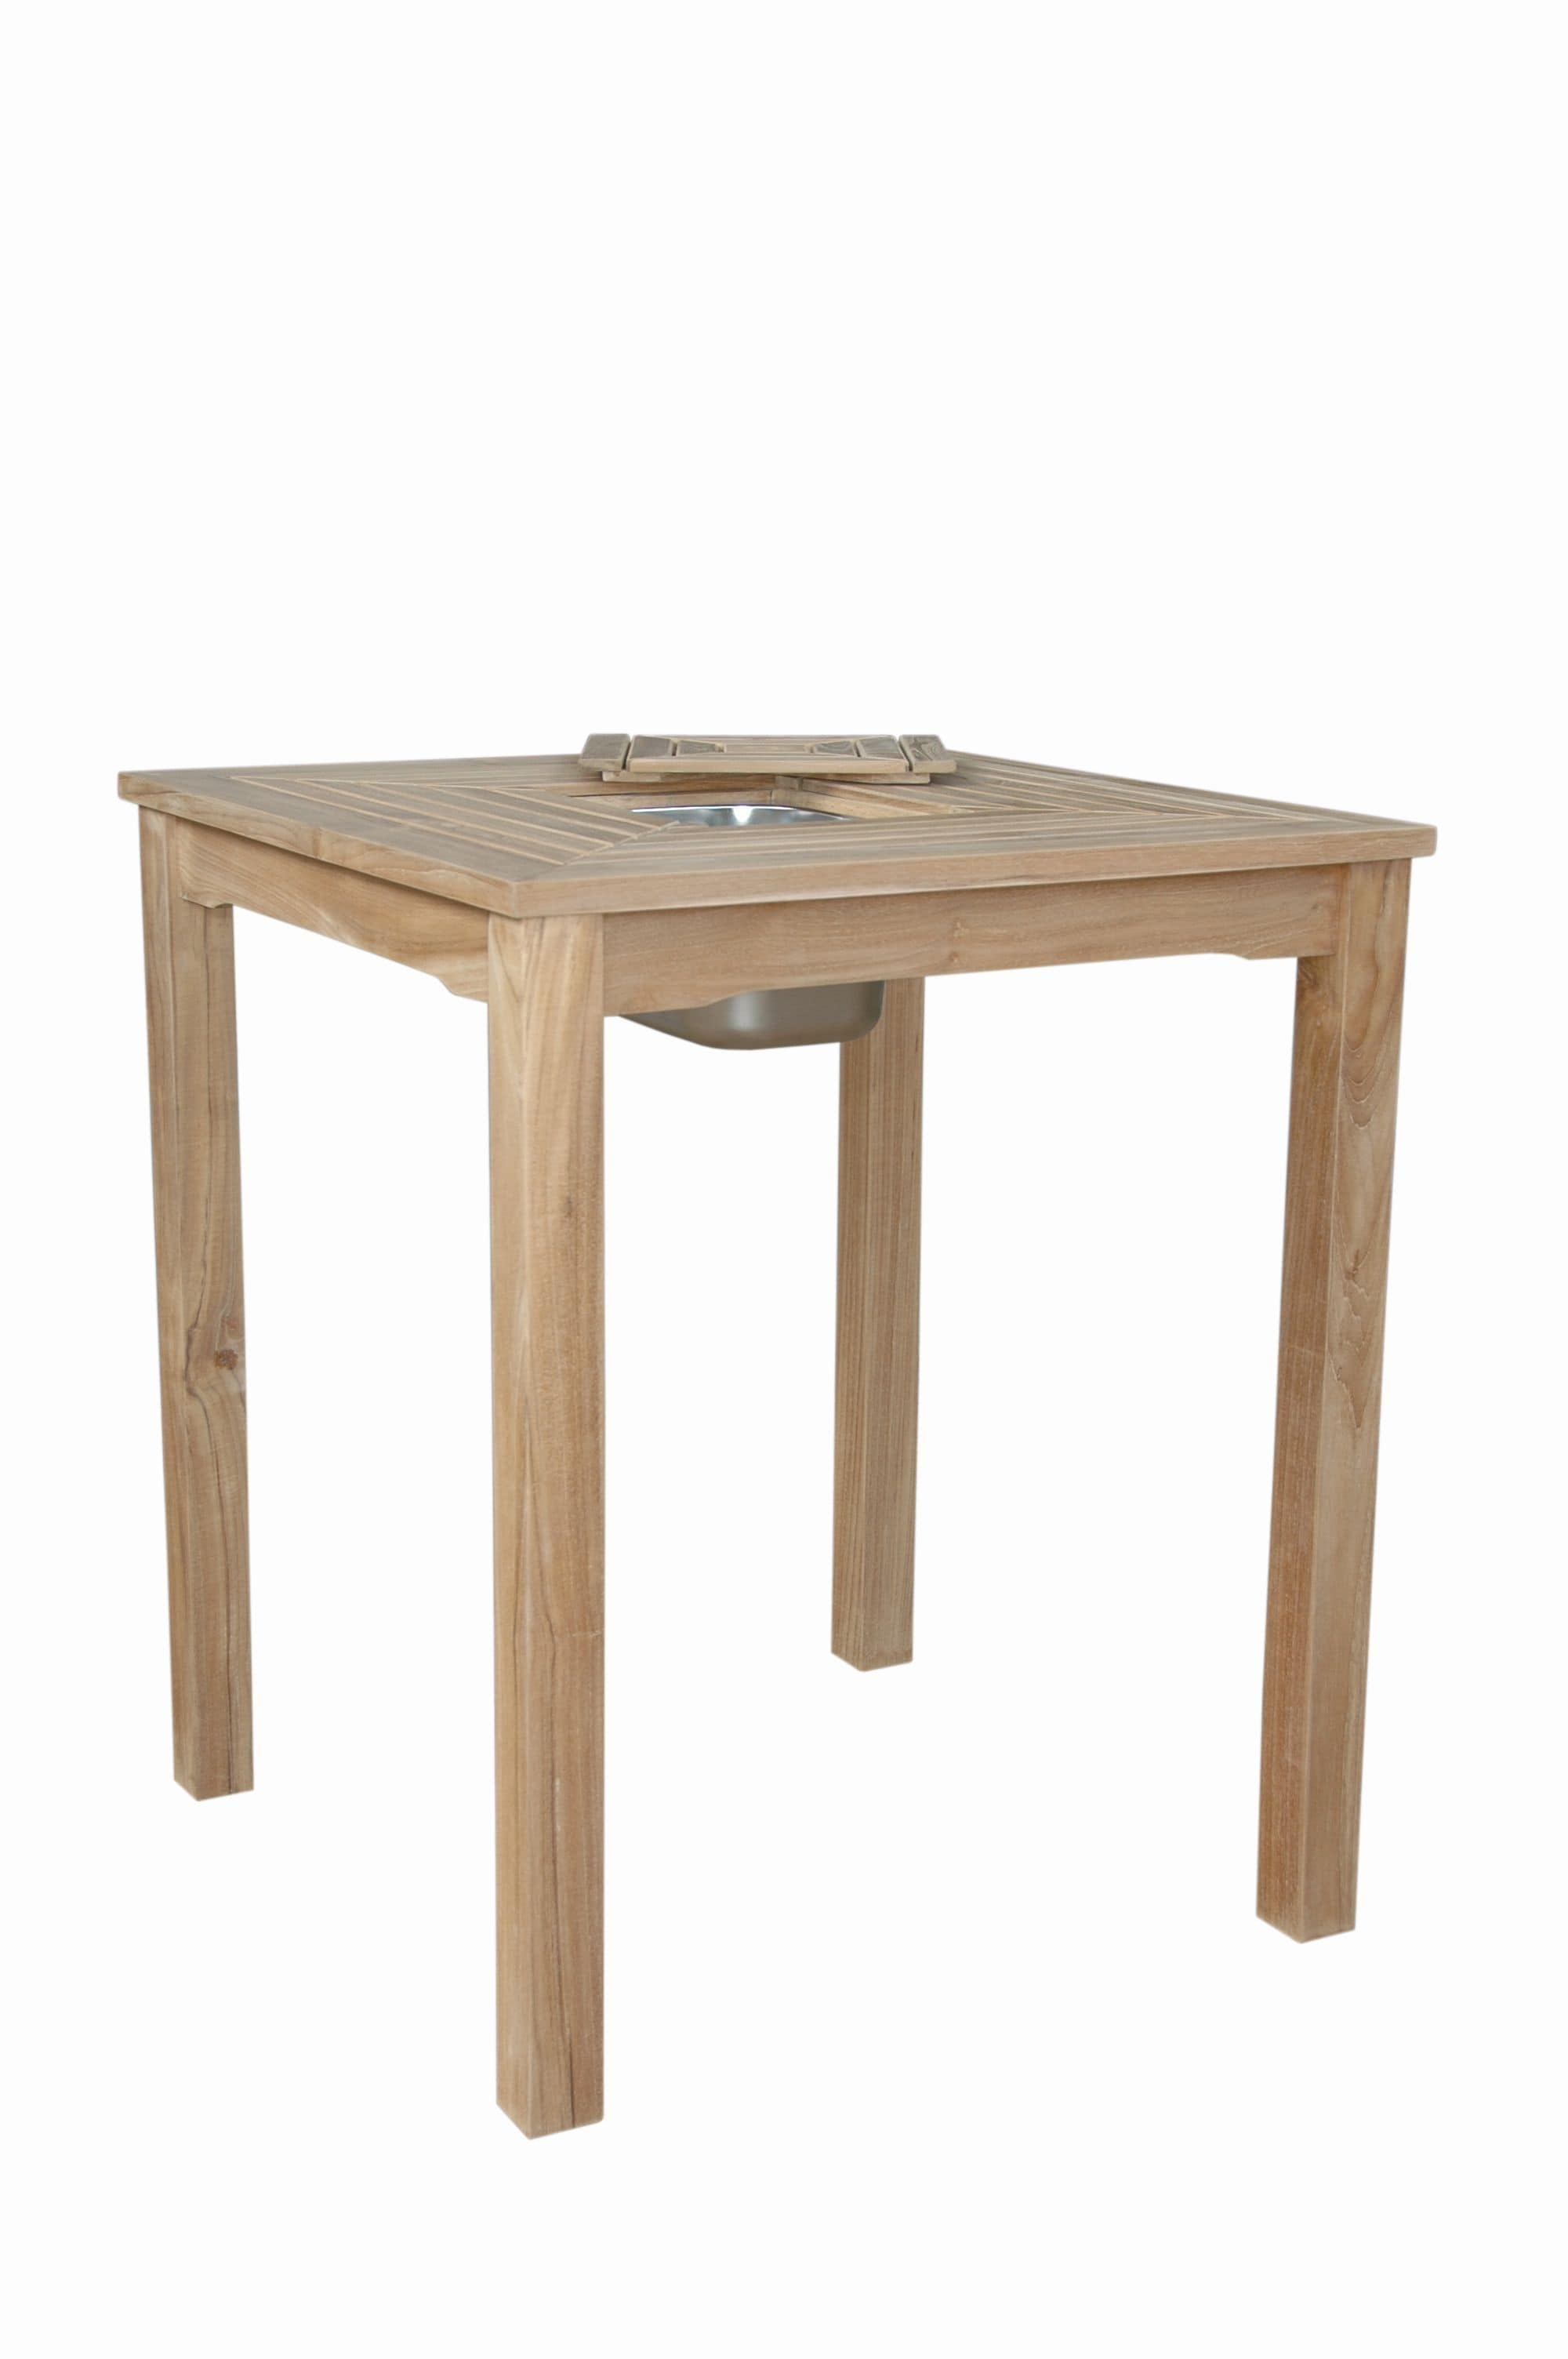 Anderson Teak Outdoor Table Anderson Teak Chatsworth Ice Chiller Bar Table